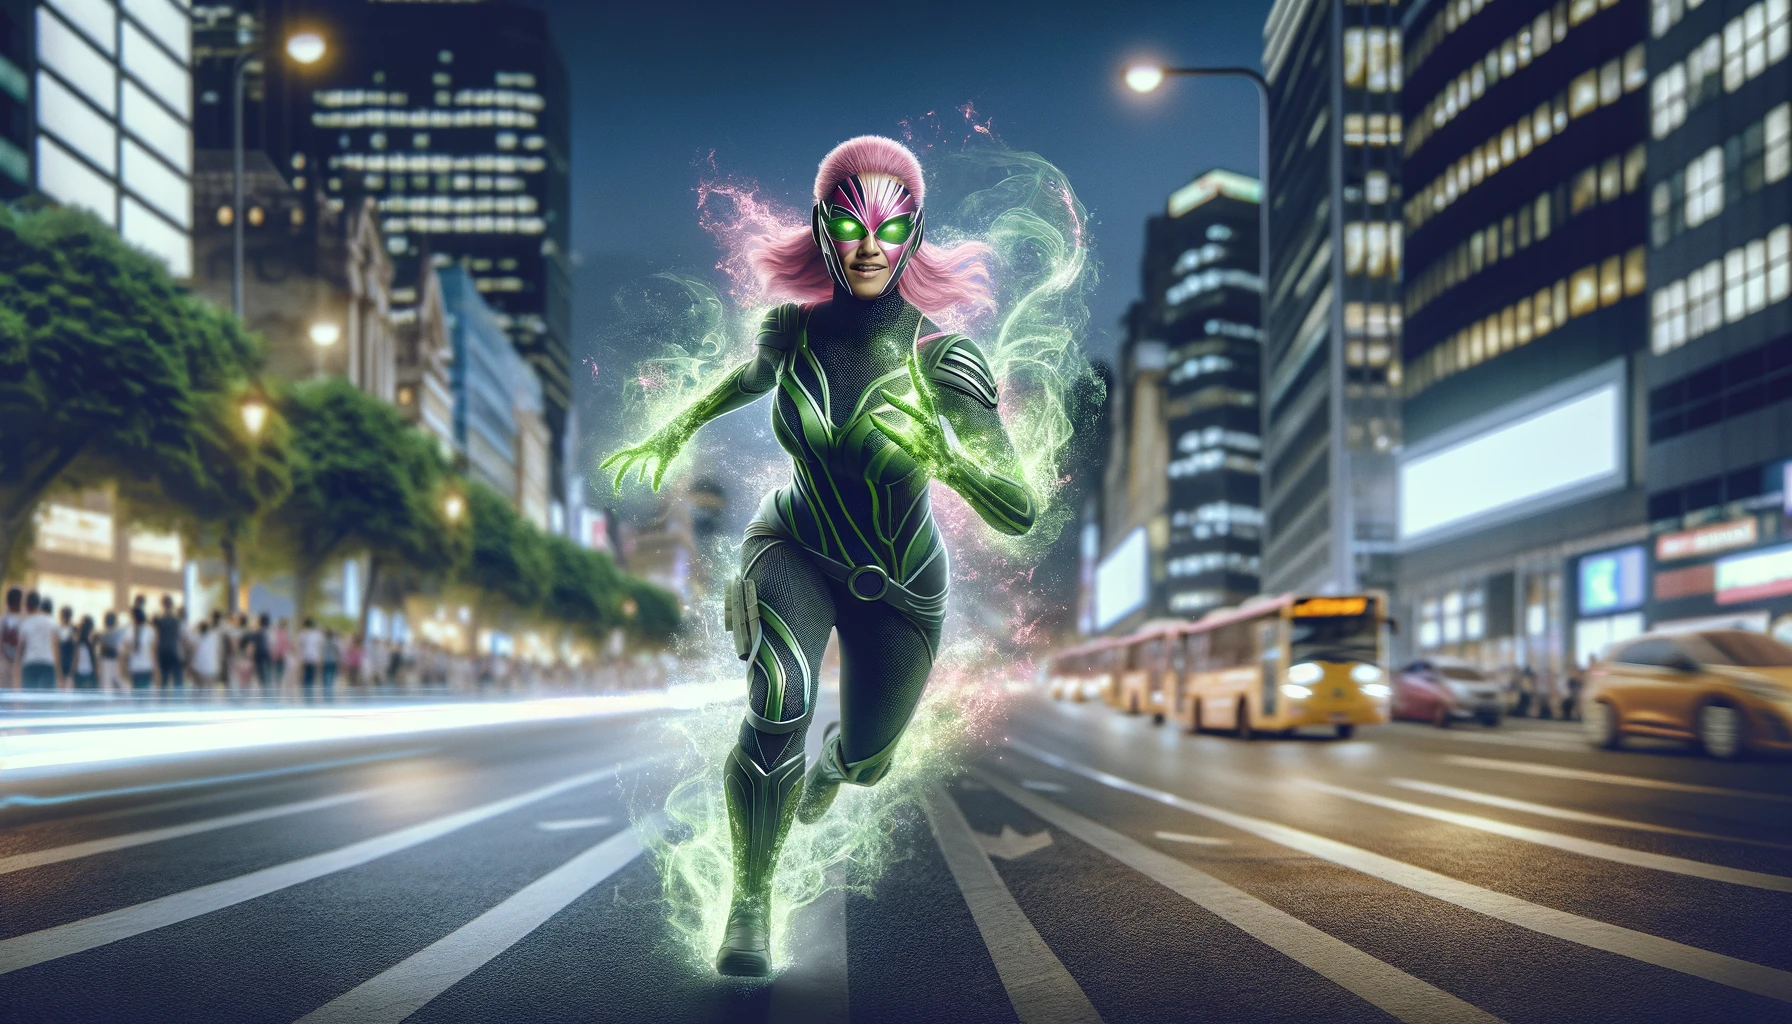 A vivid depiction of Blink, a character from Marvel Snap, racing through a bustling city street at night. She is shown with pink skin and a striking green and black costume, her hands radiating dynamic green energy, adding a supernatural flare to the realistic urban setting.